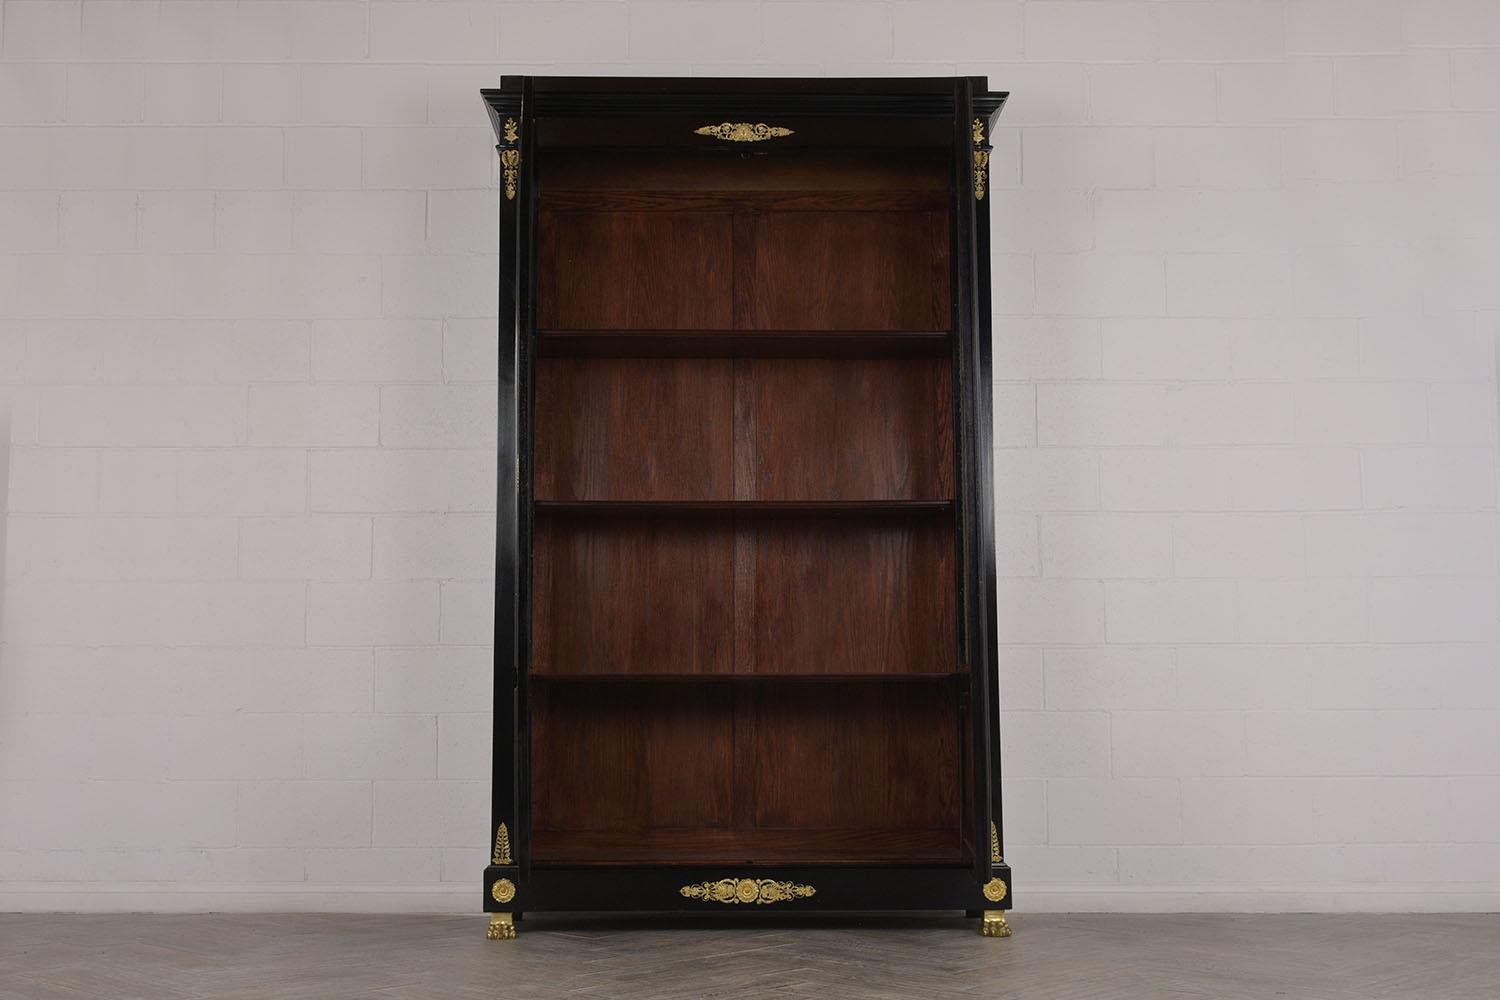 This Late 19th century French Empire Style Bookcase is made out of mahogany wood with a newly ebonized lacquered finish and has been newly restored. The display features elegant brass accents throughout the piece, two doors with its original brass